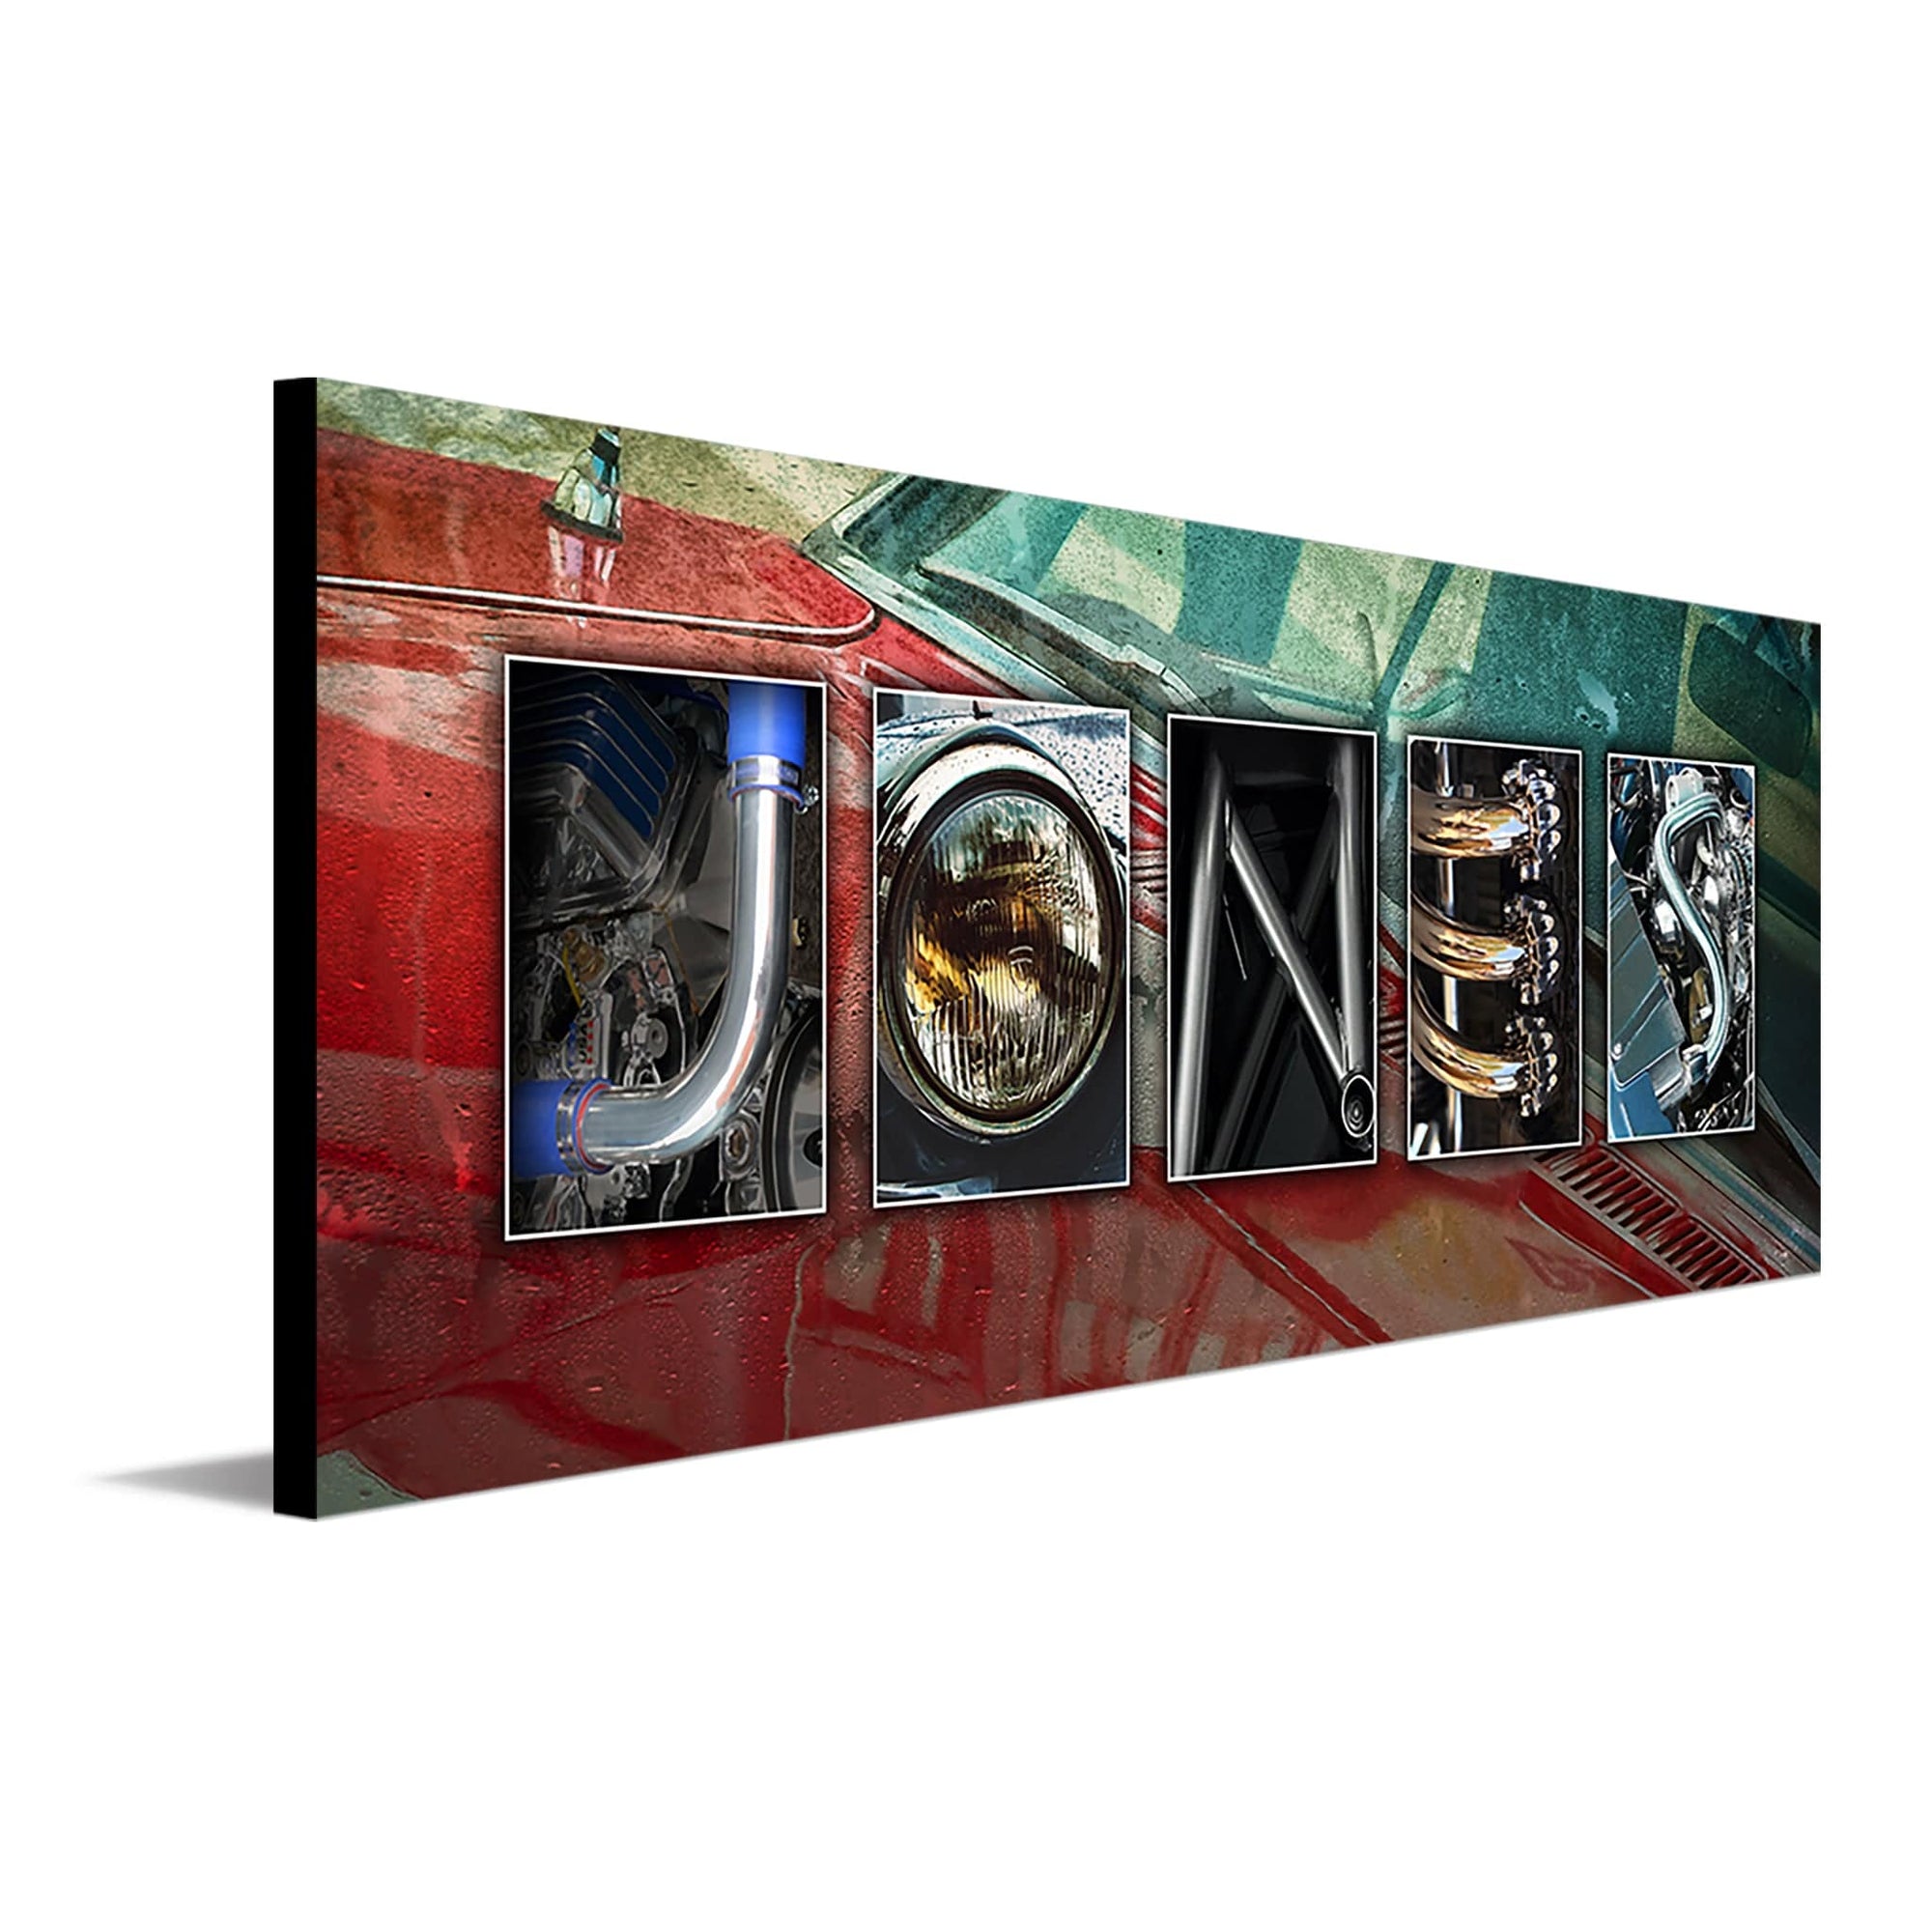 Personal-Prints Automobile Cars Letter Name Print.